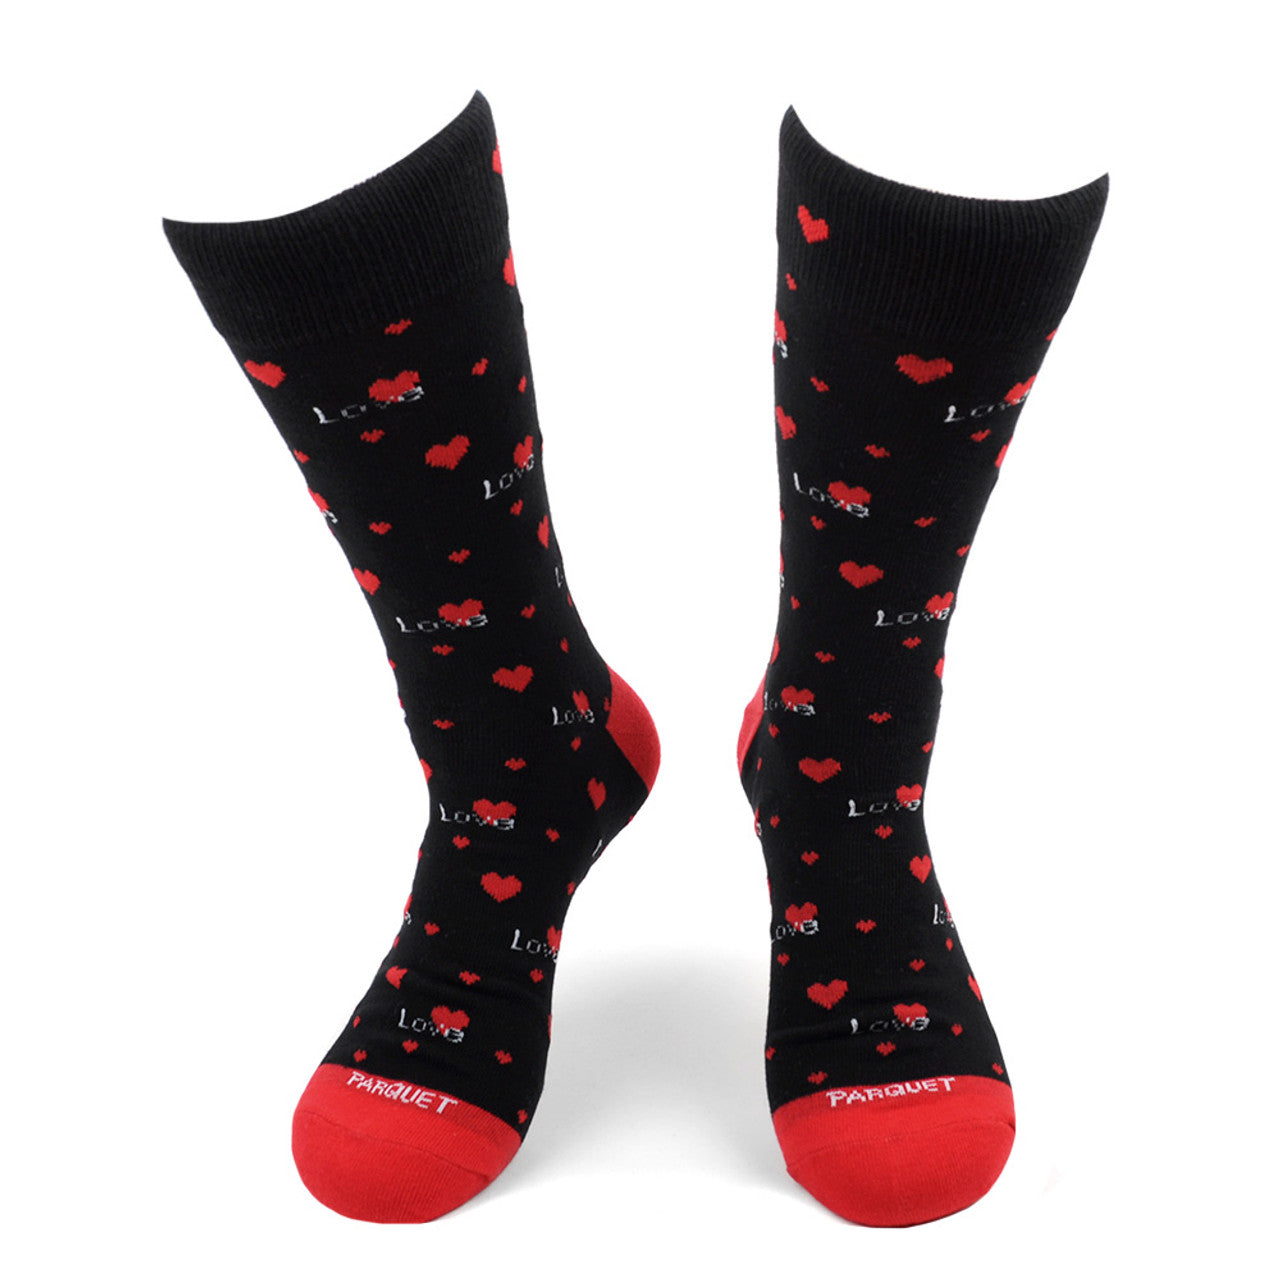 Men's Navy Blue Crew Socks with Hearts and Love Print  - Valentine's Gift for Him